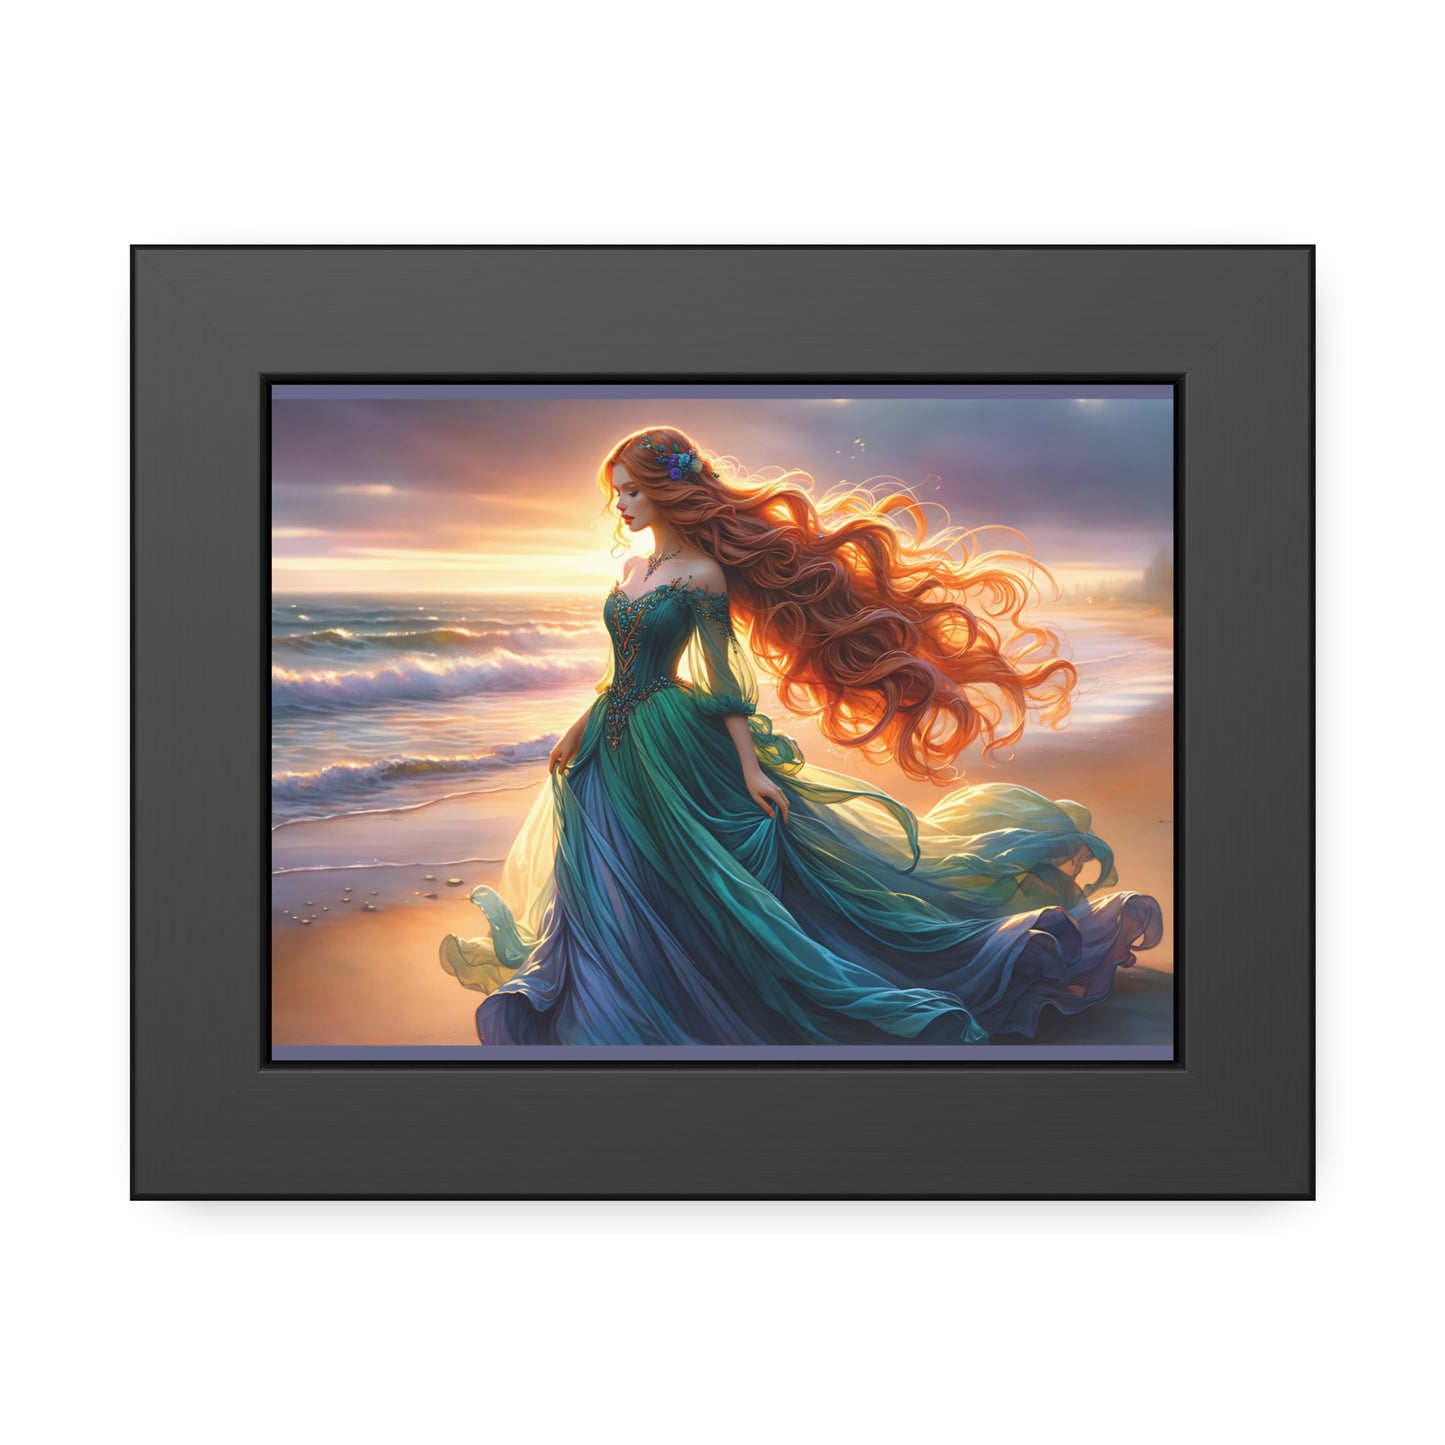 Once Upon A Fantasy - On The Shore Framed Posters